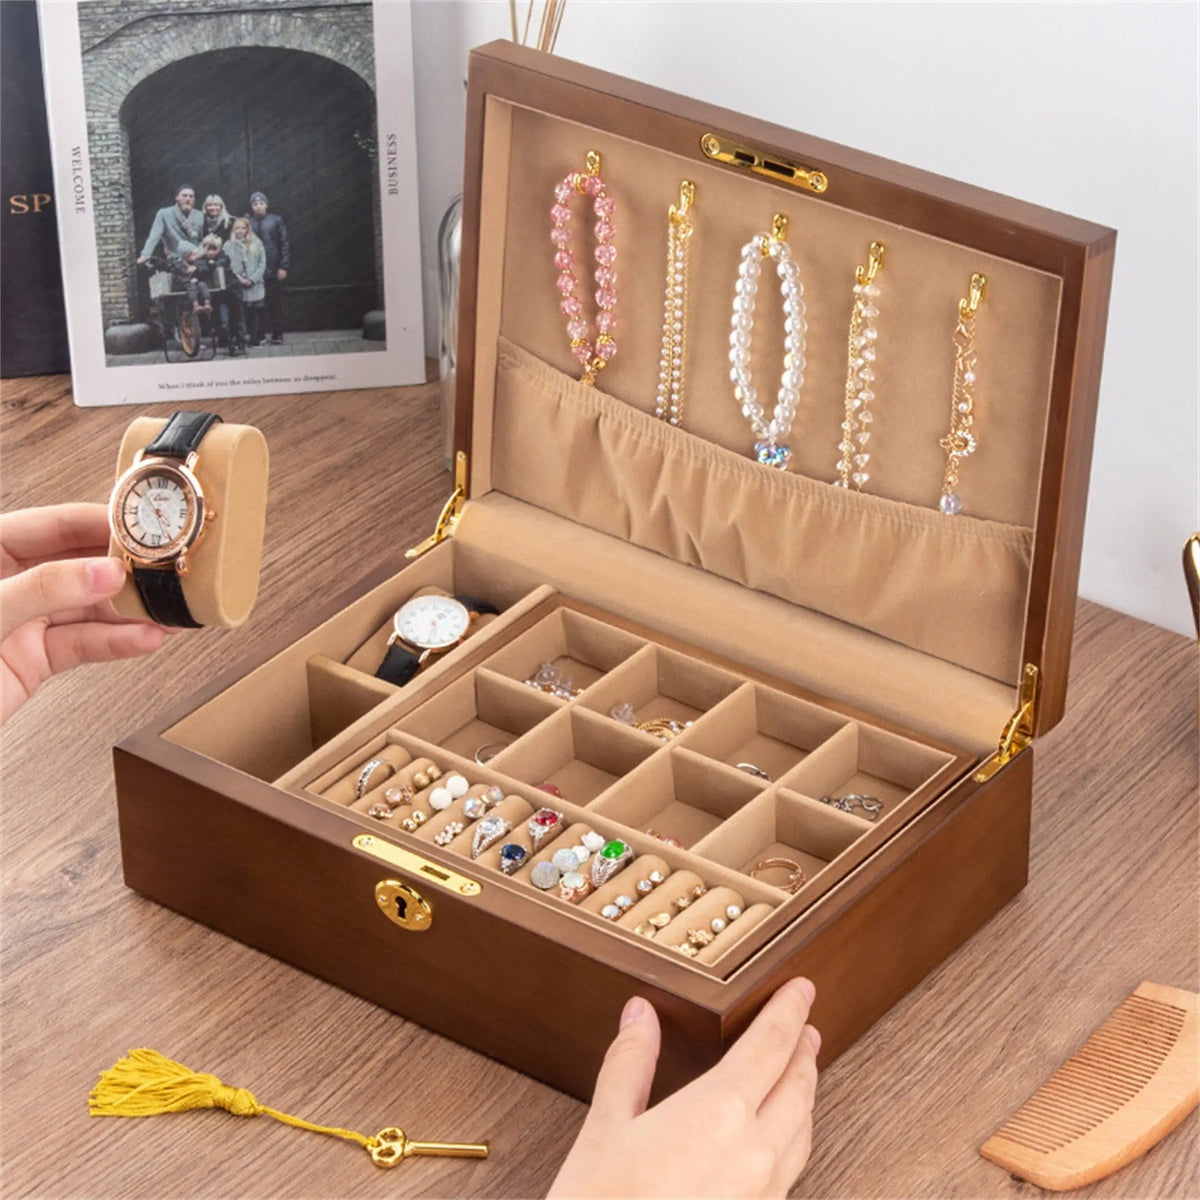 Wooden Jewellery Box On Wooden